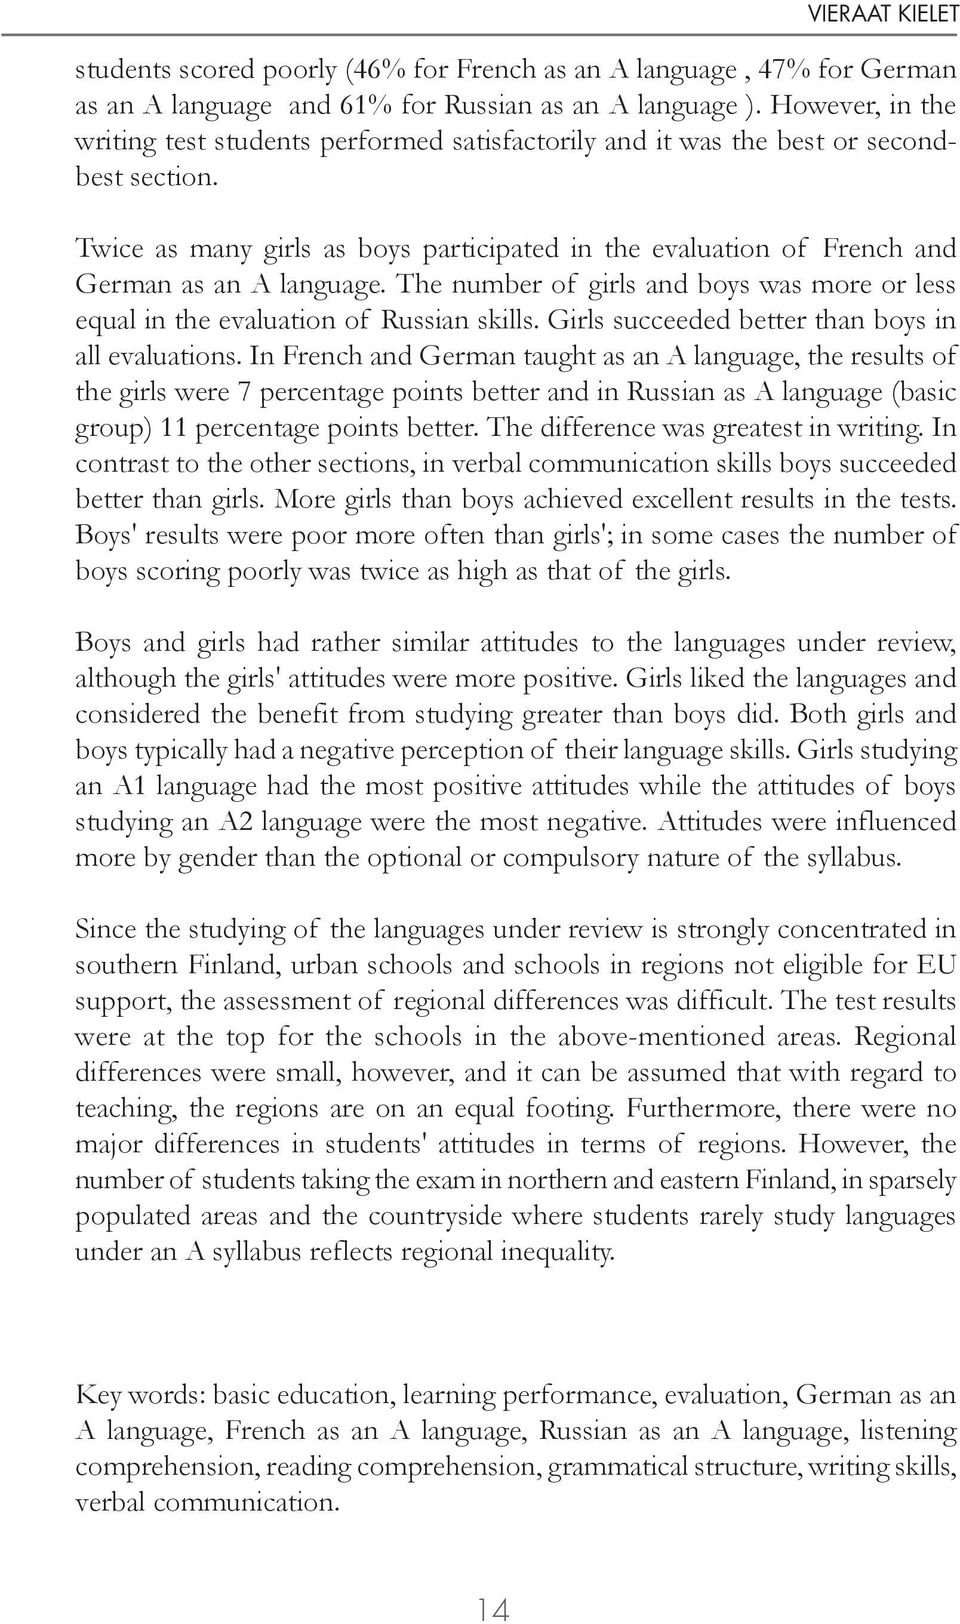 Twice as many girls as boys participated in the evaluation of French and German as an A language. The number of girls and boys was more or less equal in the evaluation of Russian skills.